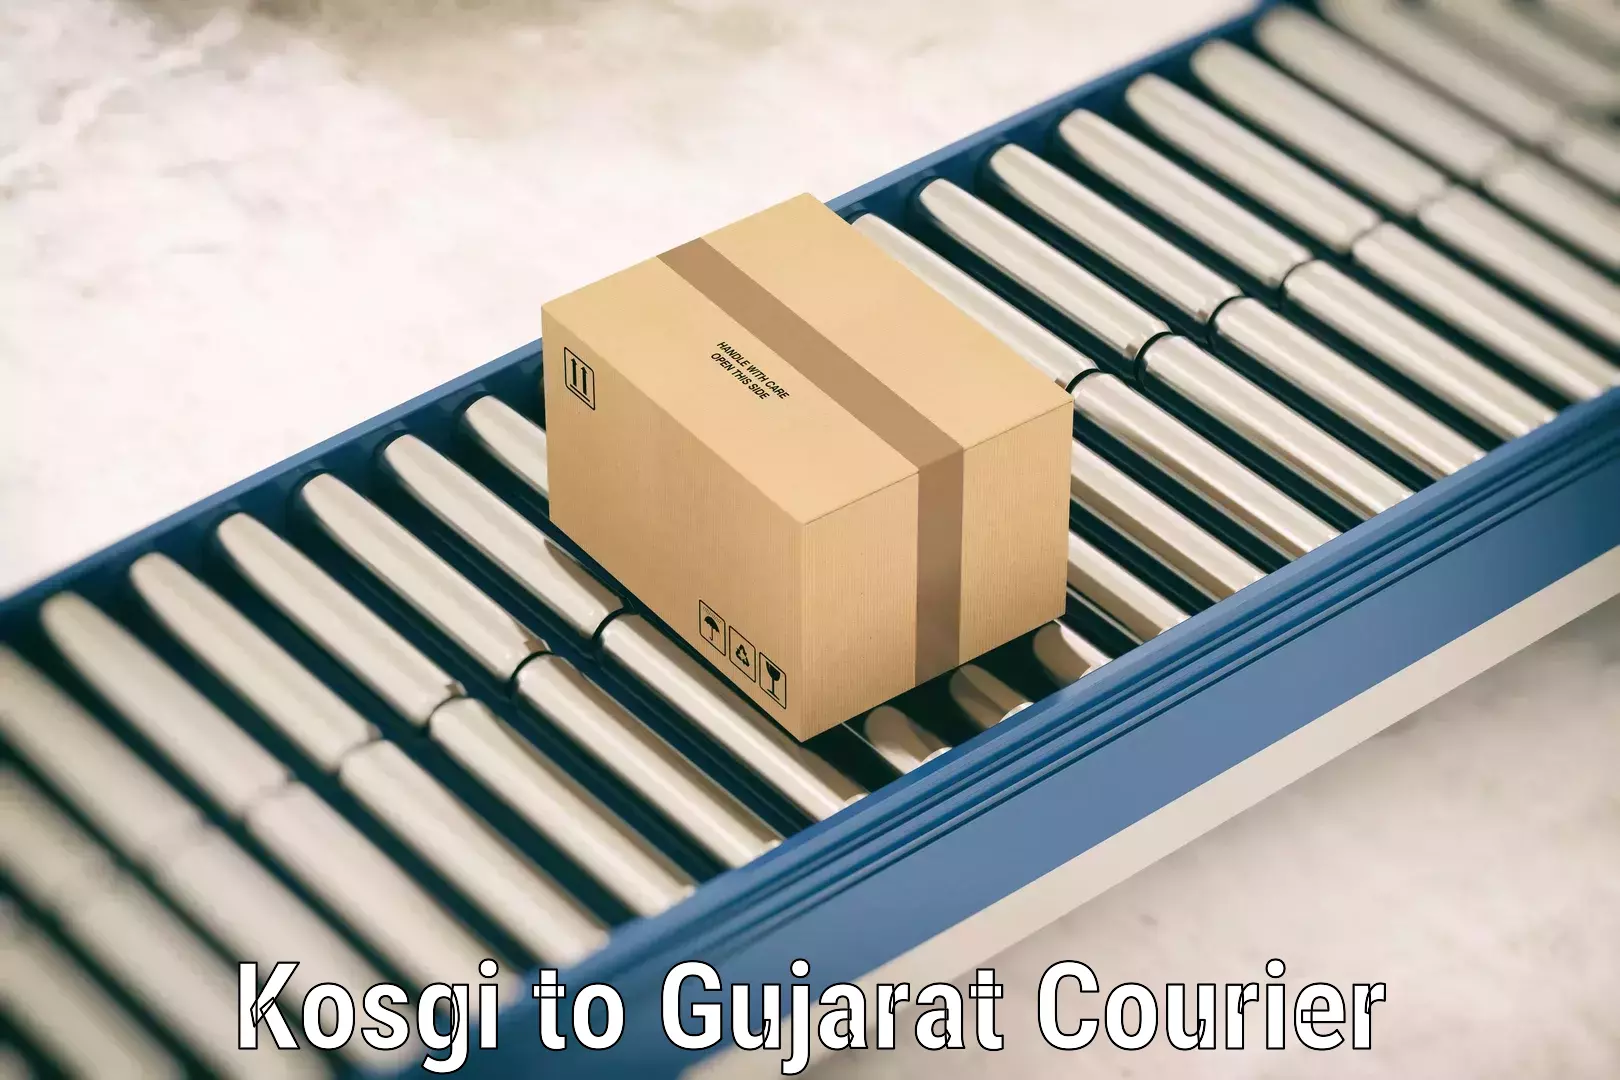 Luggage delivery system Kosgi to Surat